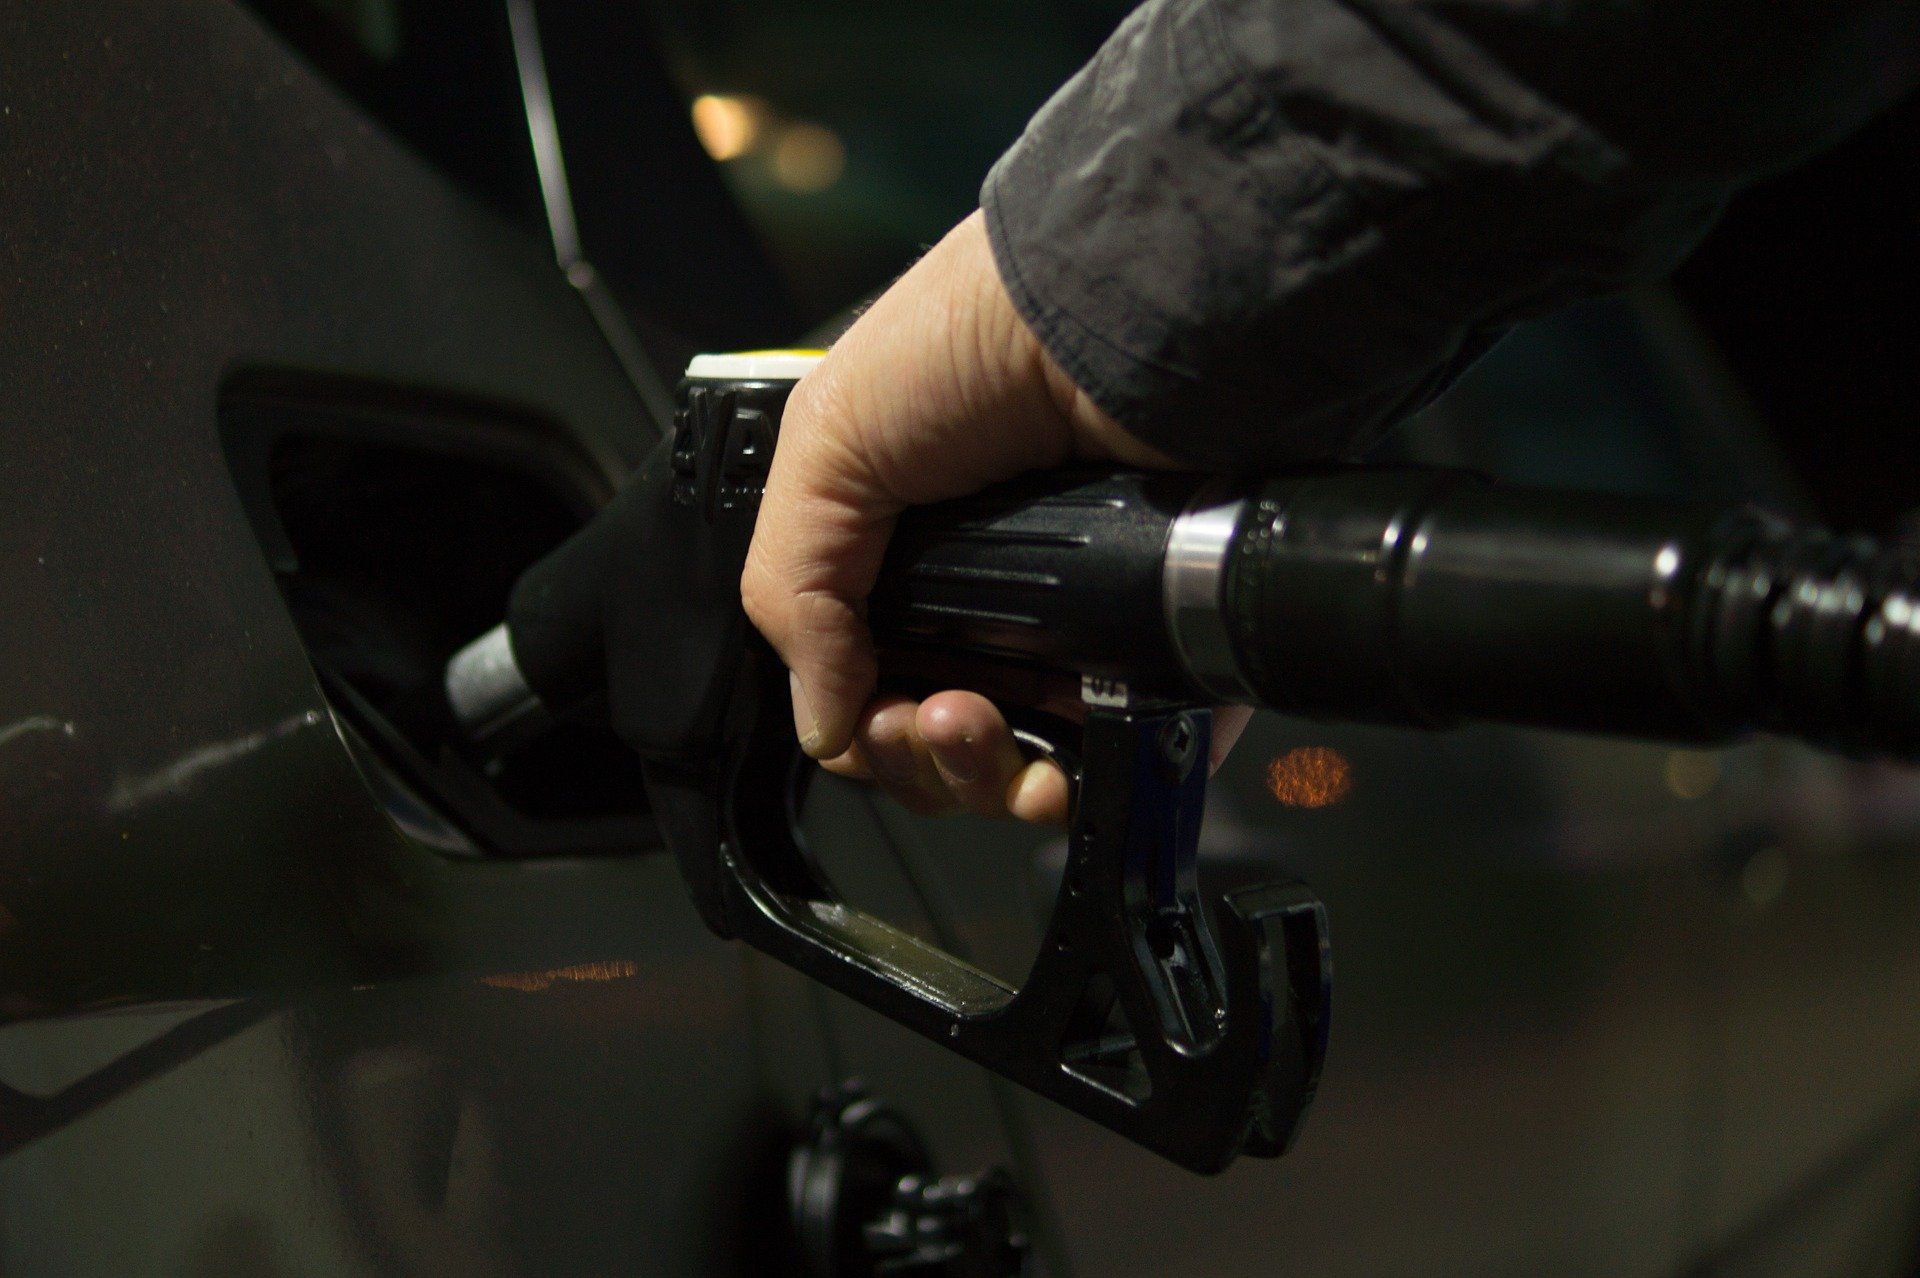 Fuel prices: Petrol priced at Rs 95.41, diesel Rs 86.67 in Delhi on January 17, 2022